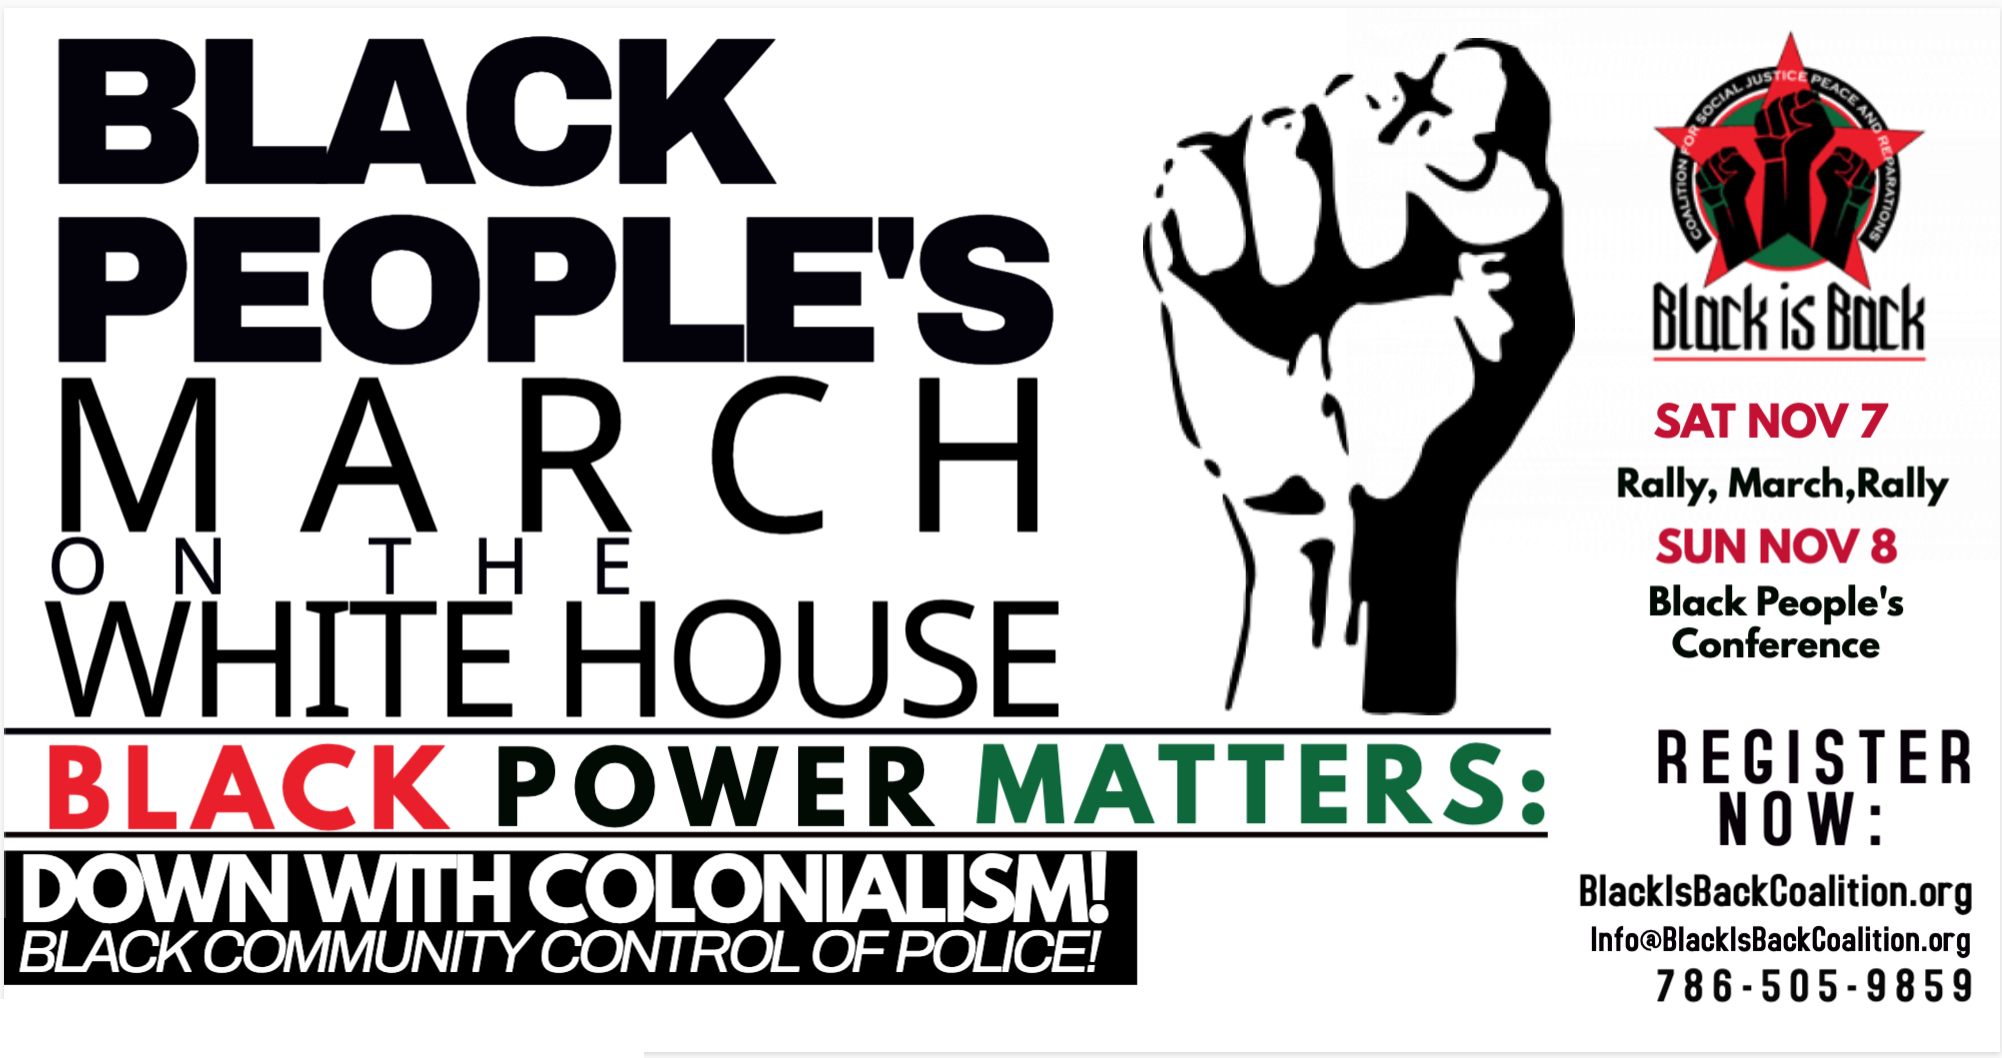 You are currently viewing Call to BLACK PEOPLE’S MARCH ON WHITE HOUSE!!! Black Power Matters: Down with Colonialism! Black Community Control of the Police!